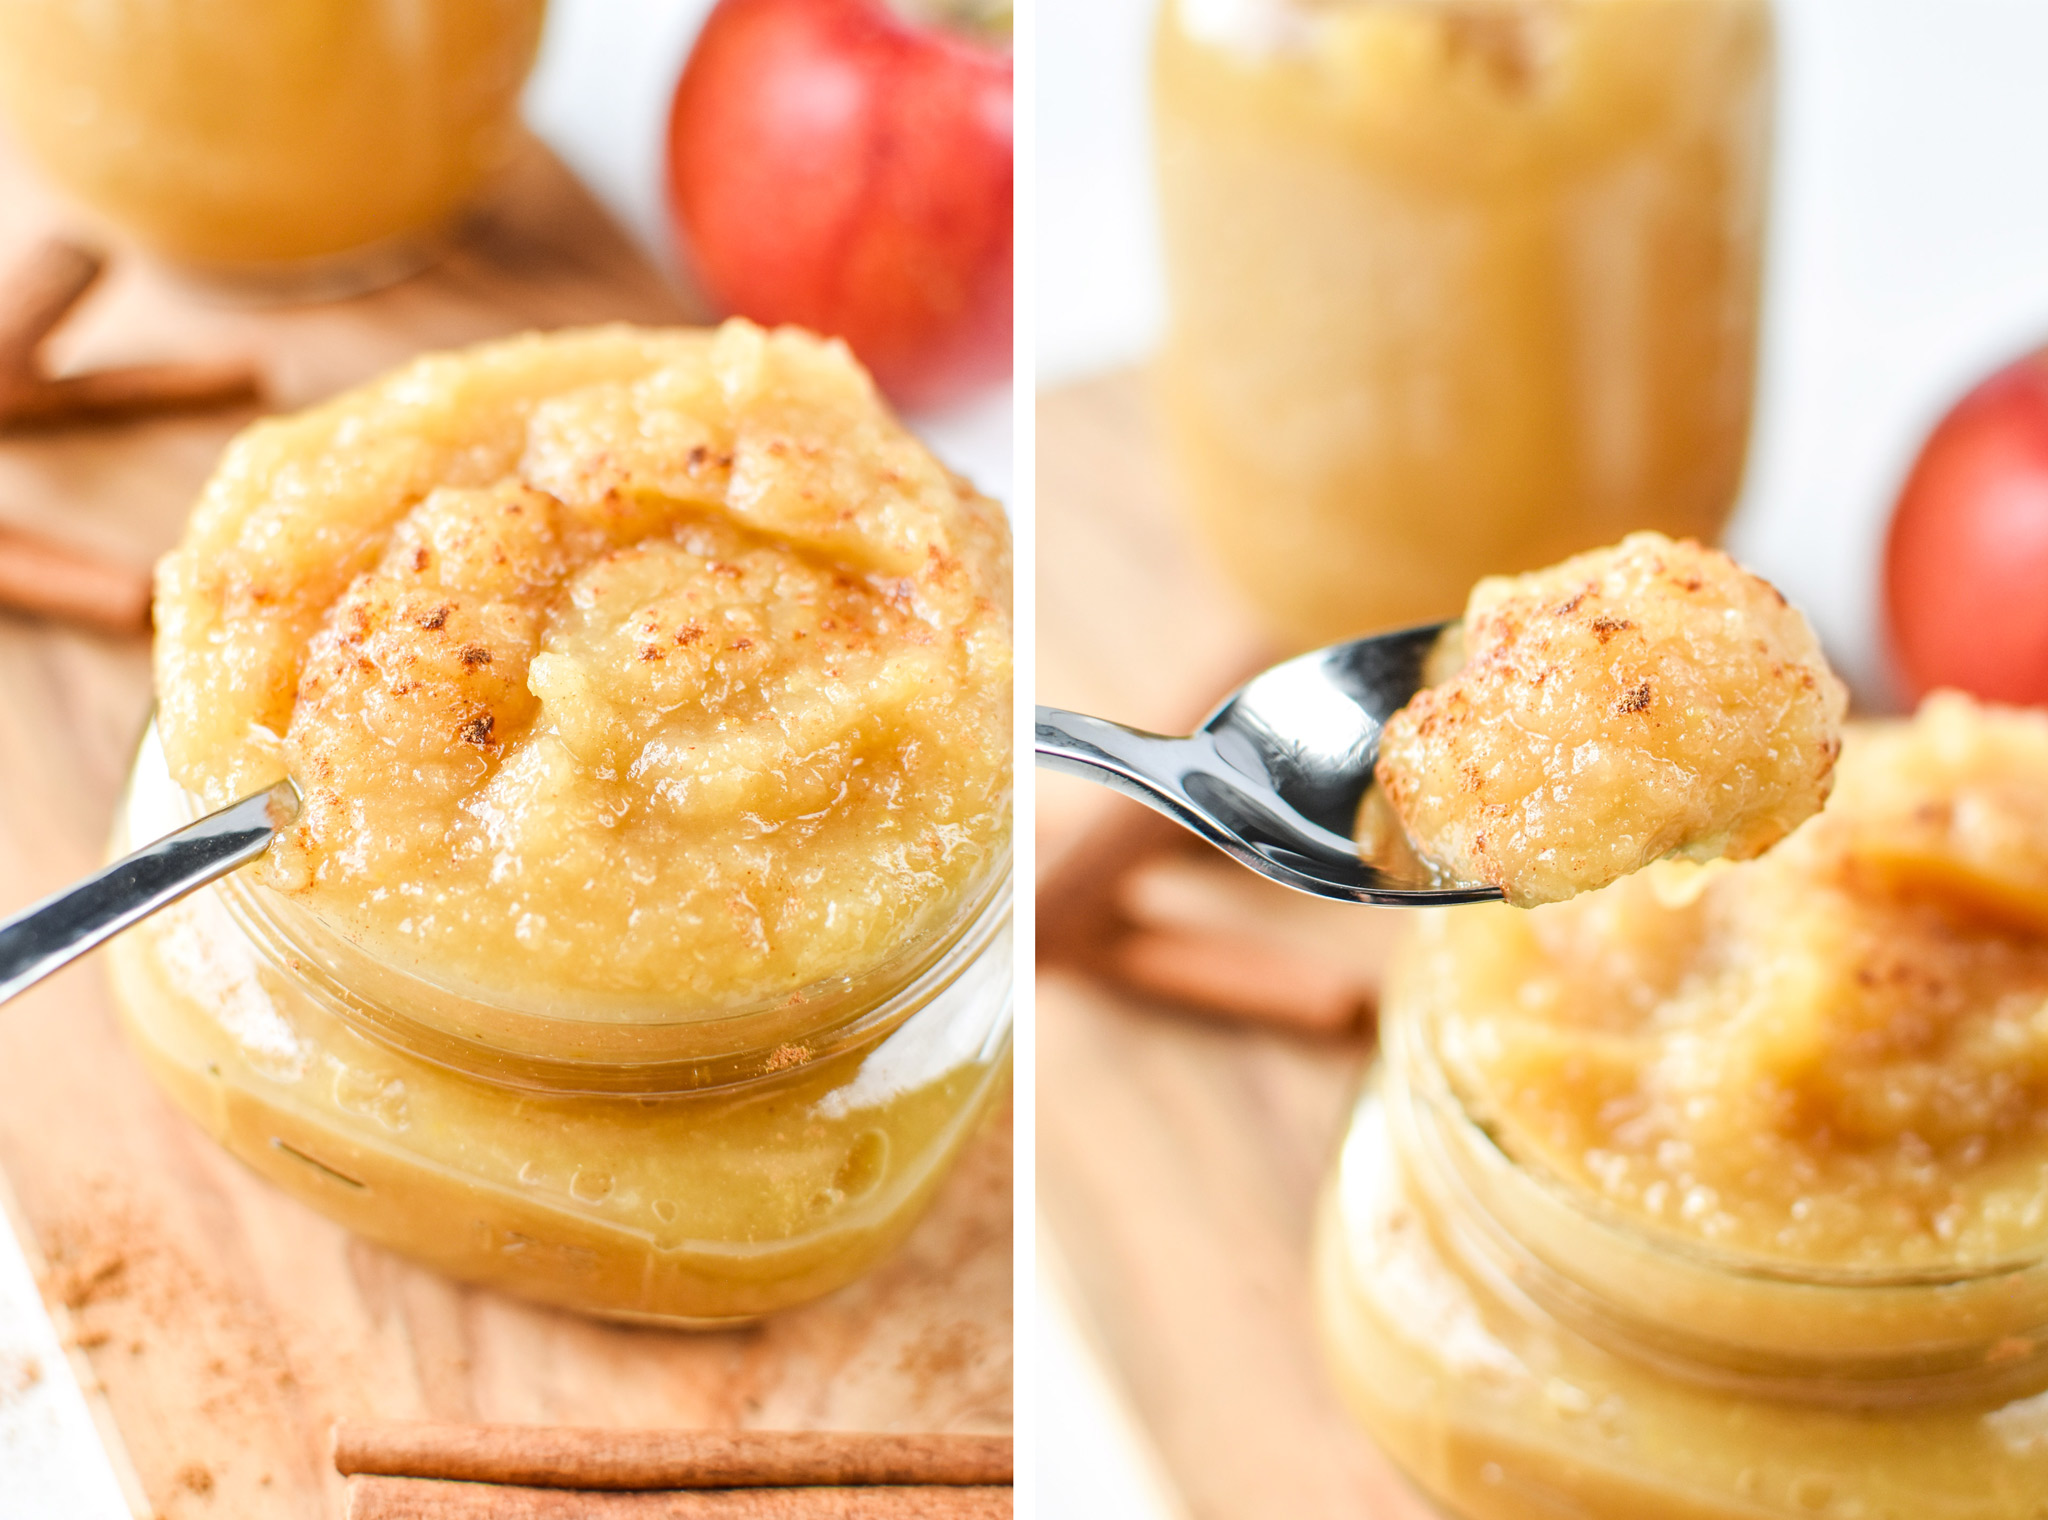 A spoonful of homemade applesauce. Store bought vs homemade: Which is cheaper?